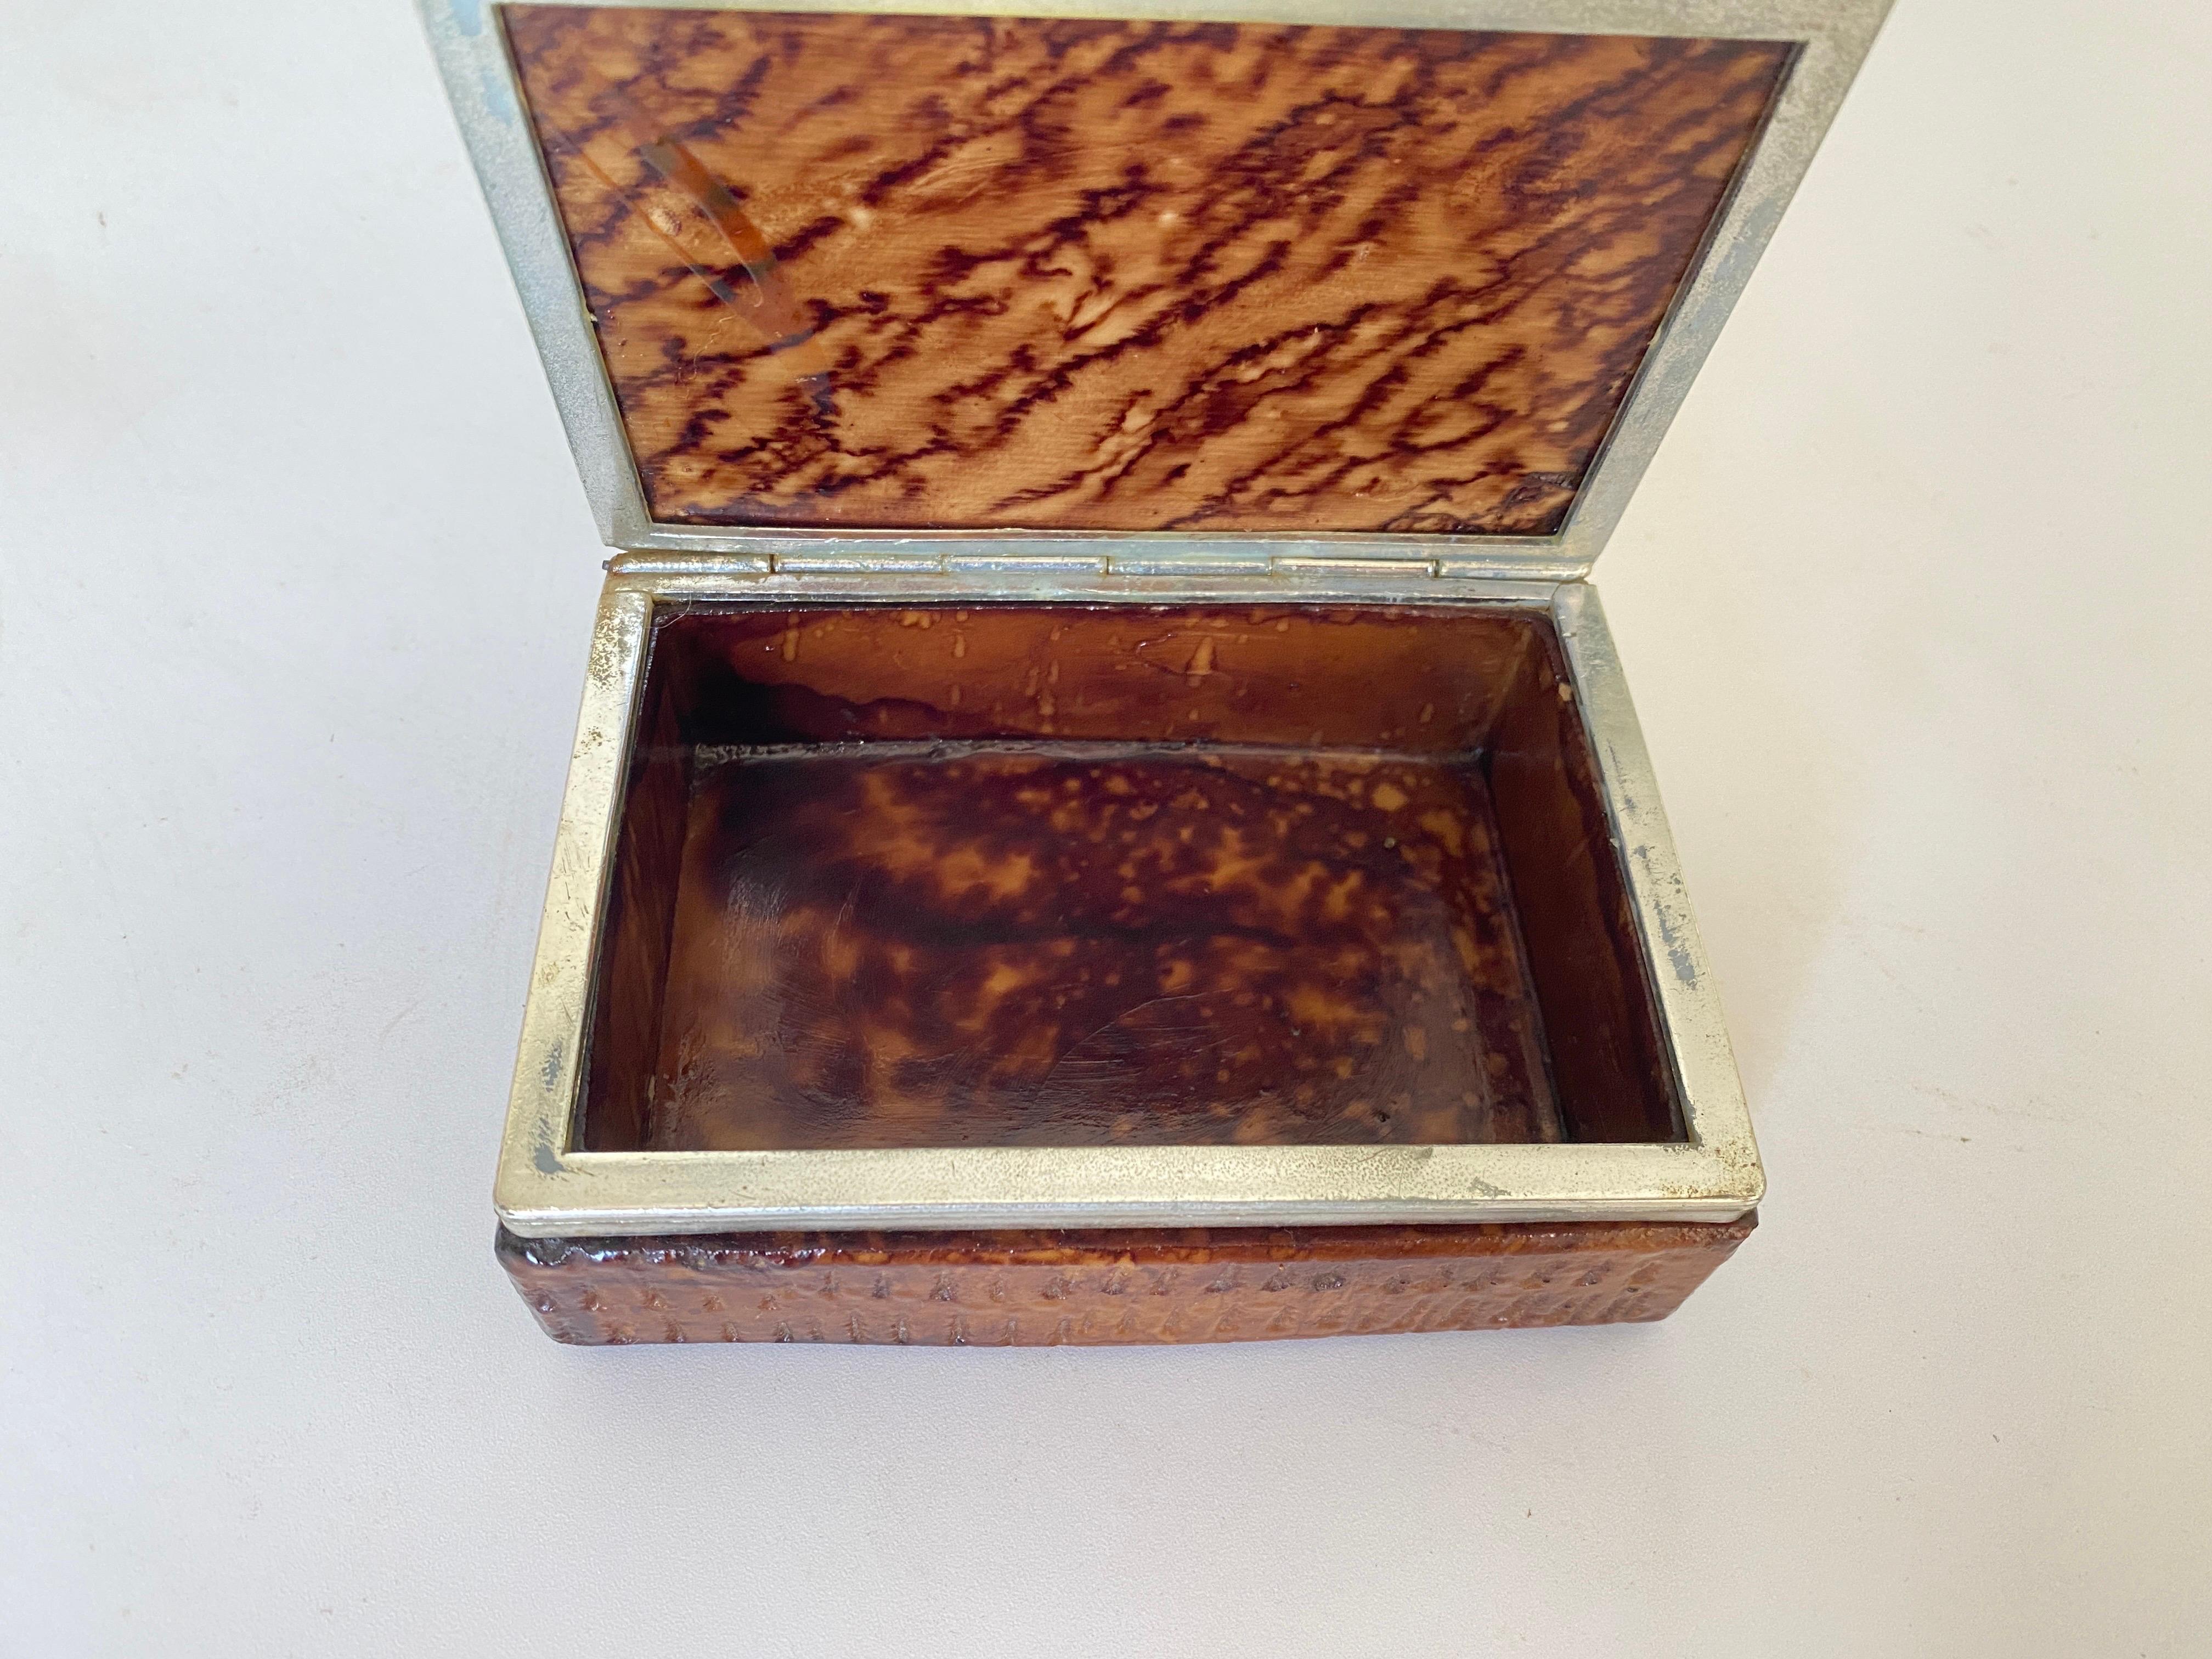 Box in onyx, in a brown color. It is a decorative or jewelry box, made in Italy, circa 1970.